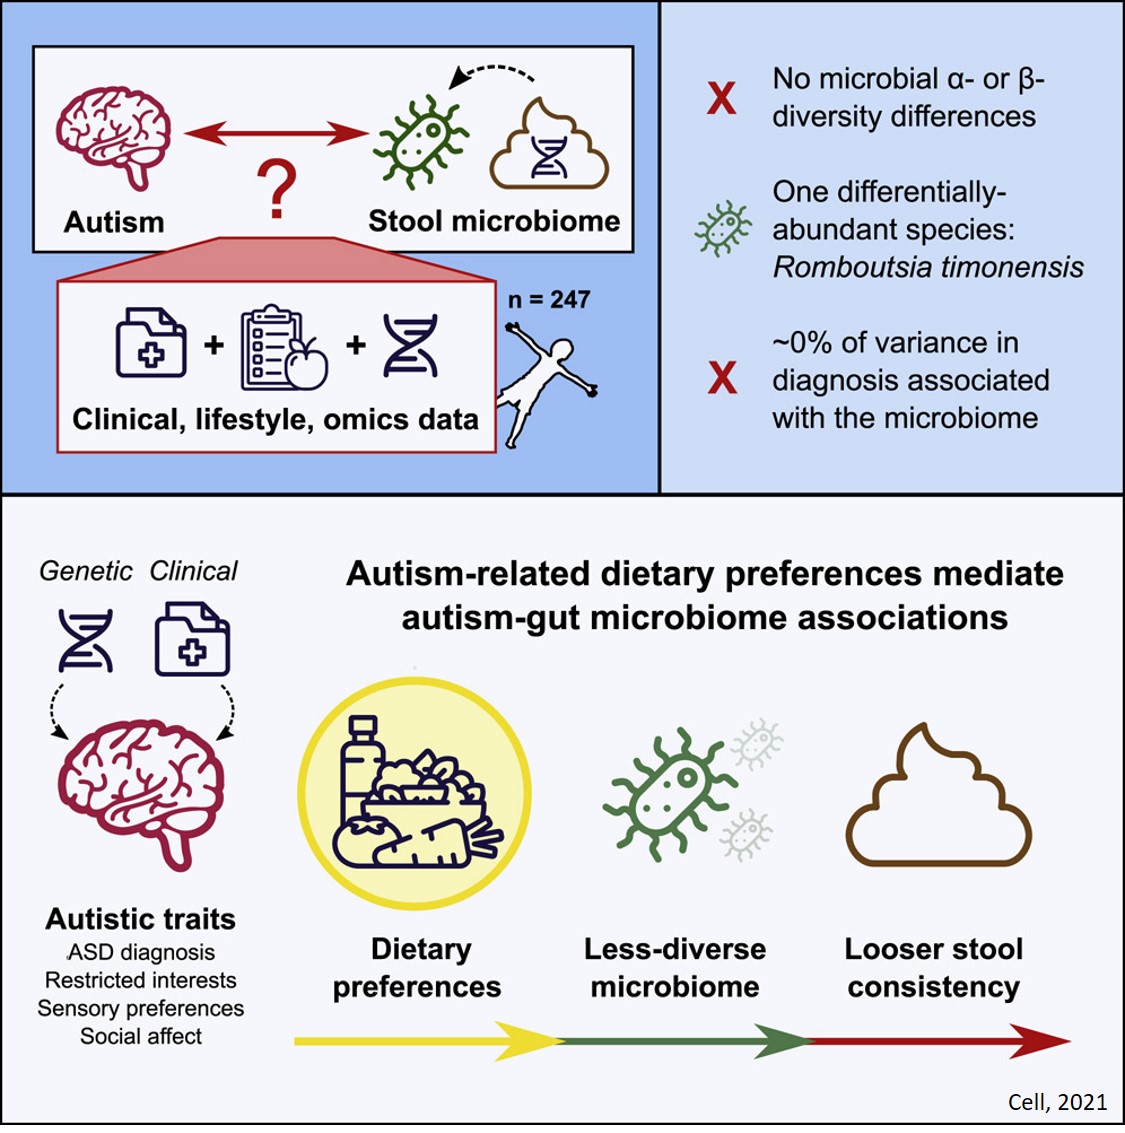 Dietary preferences may explain the gut microbiota differences in autism